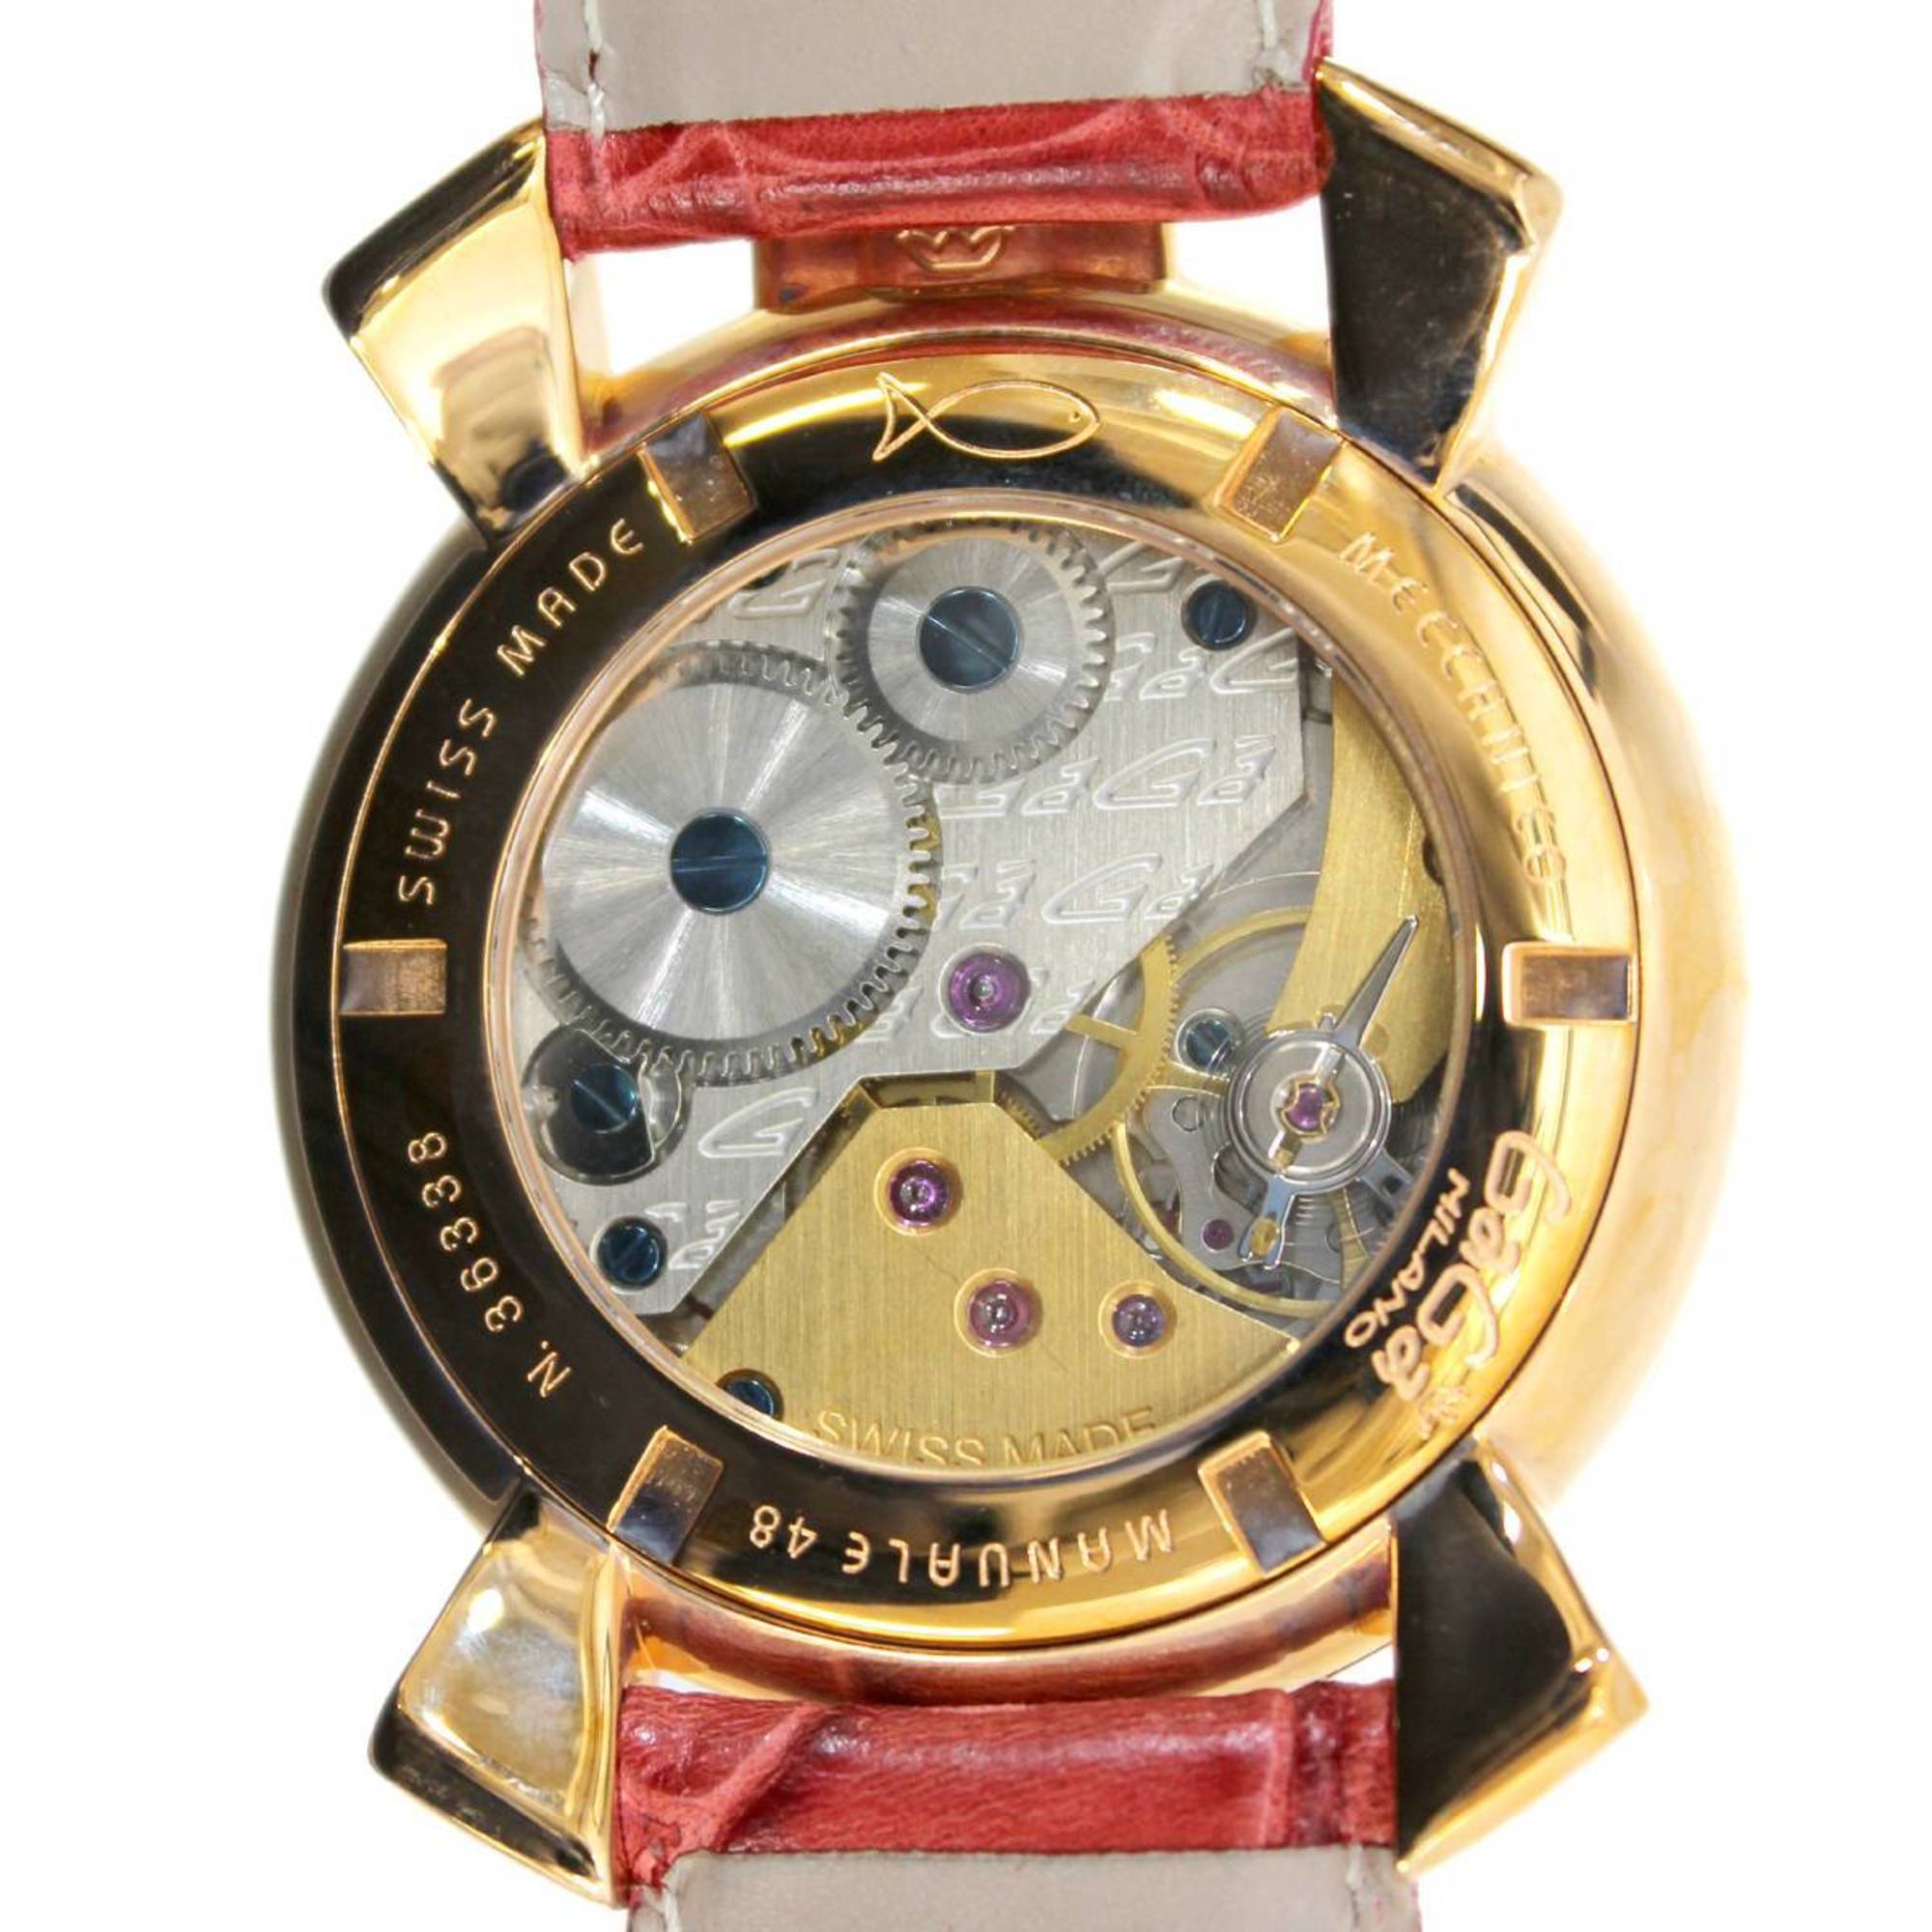 GAGAMILANO Gaga Milano Manuale 48MM hand-wound watch REF5011 MANUALE red men's women's